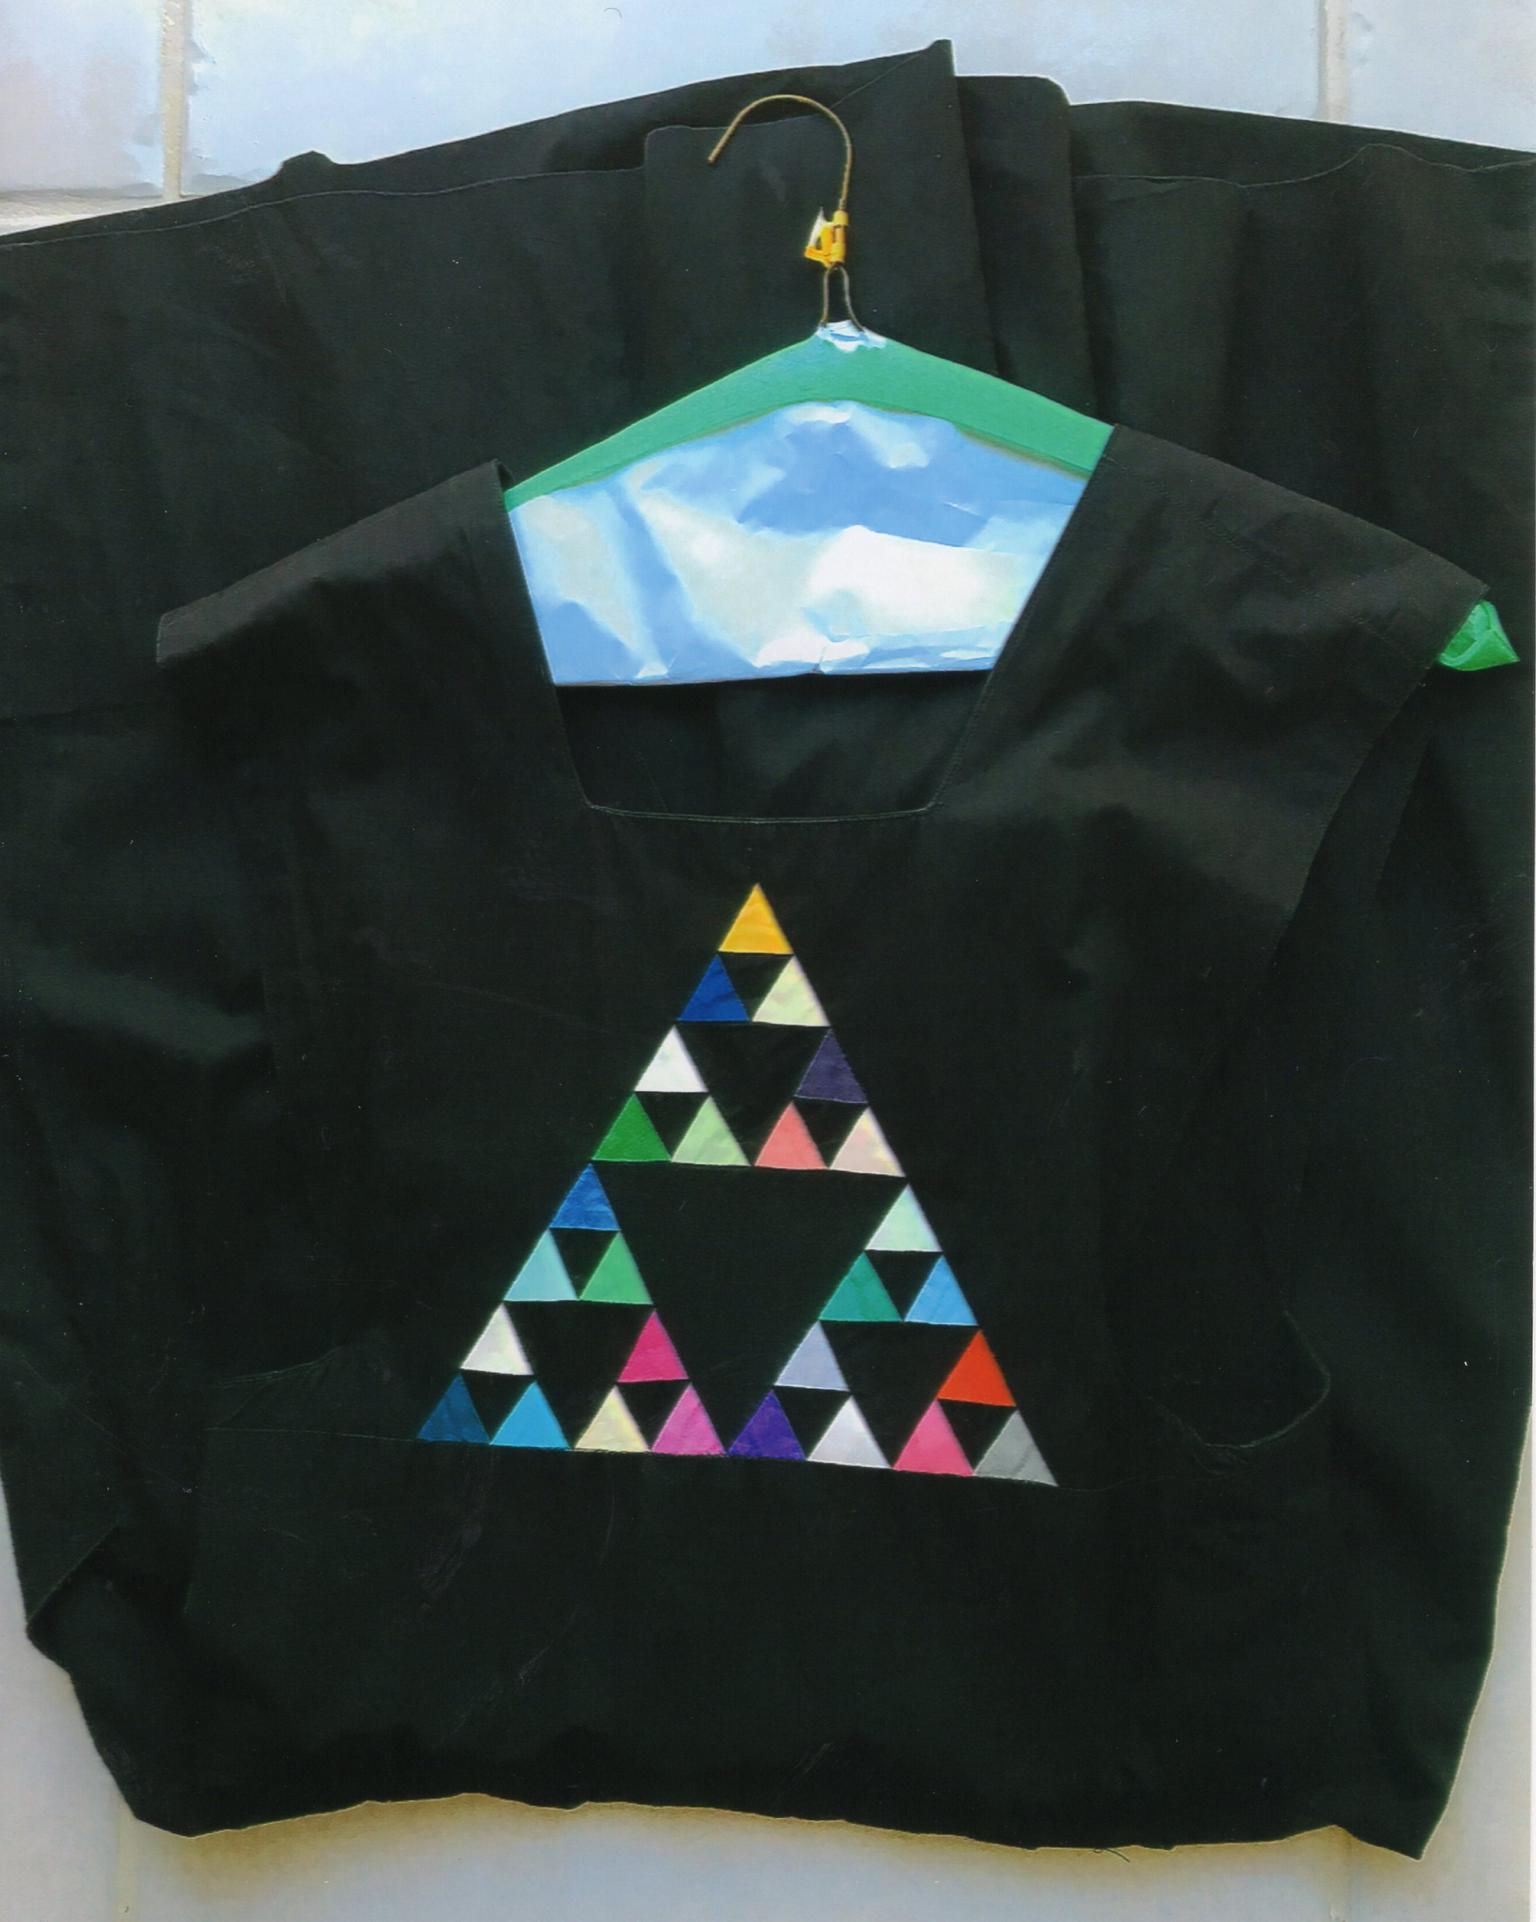 Image for look 'Blazer with approximate logarithmic spirals in the design, Jumper with Sierpinski's Triangle on the  bib, Koch Curve Jumper, t-shirts with Leonardo daVinci designs embroidered'